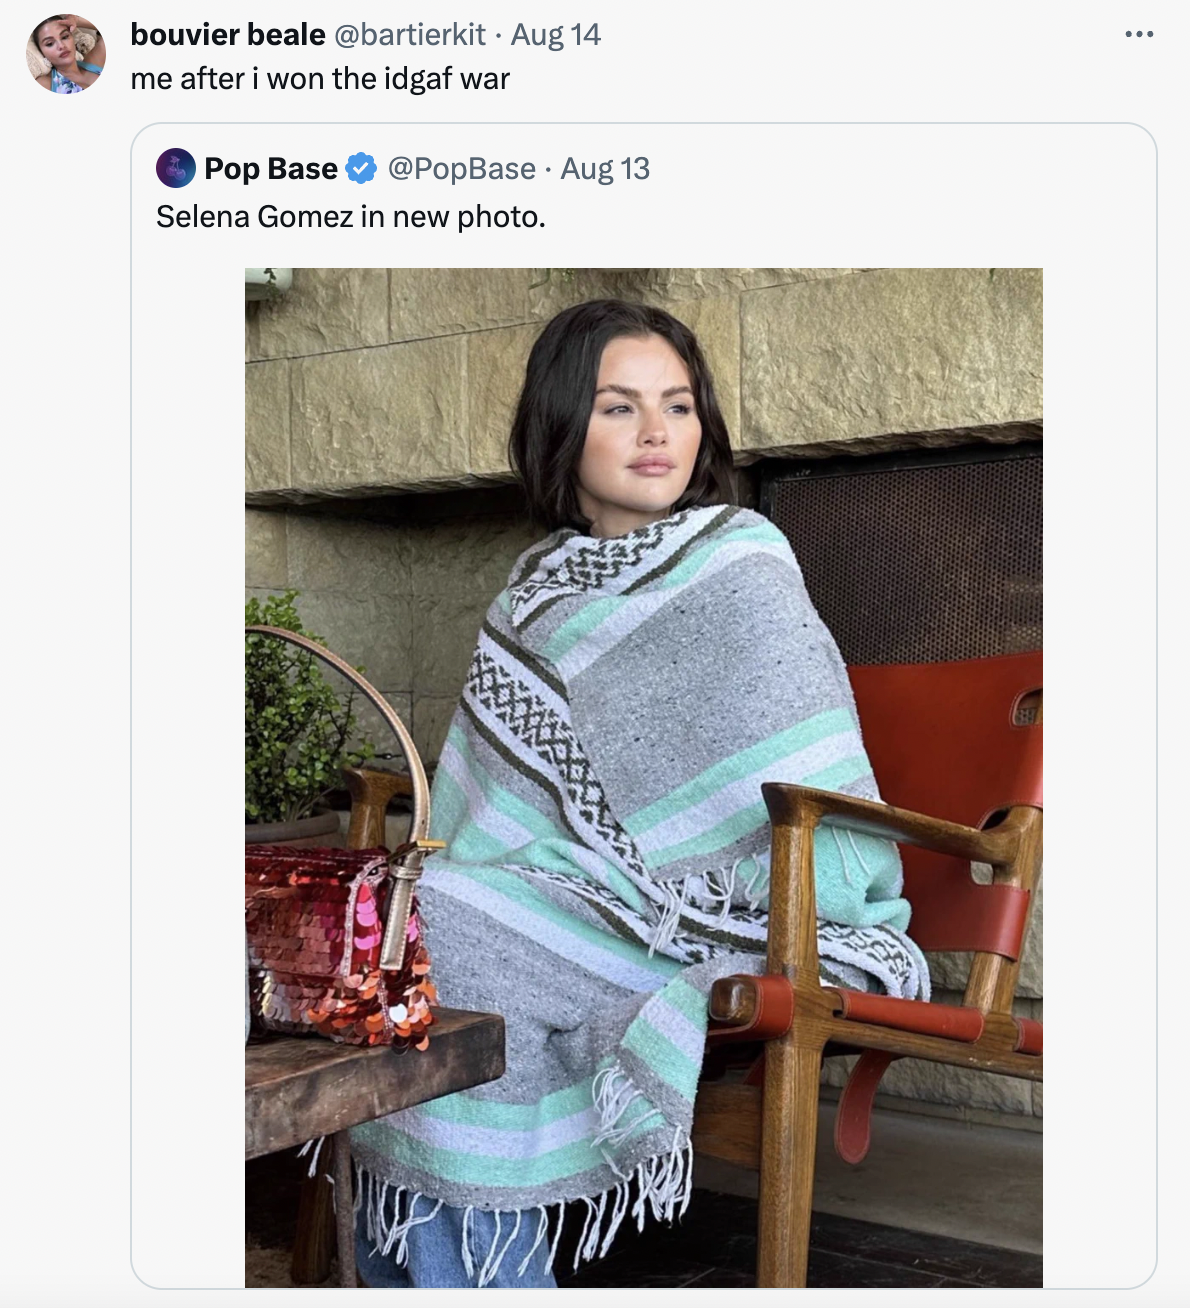 selena gomez in a blanket - stole - bouvier beale Aug 14 me after i won the idgaf war Pop Base Aug 13 Selena Gomez in new photo. 7784